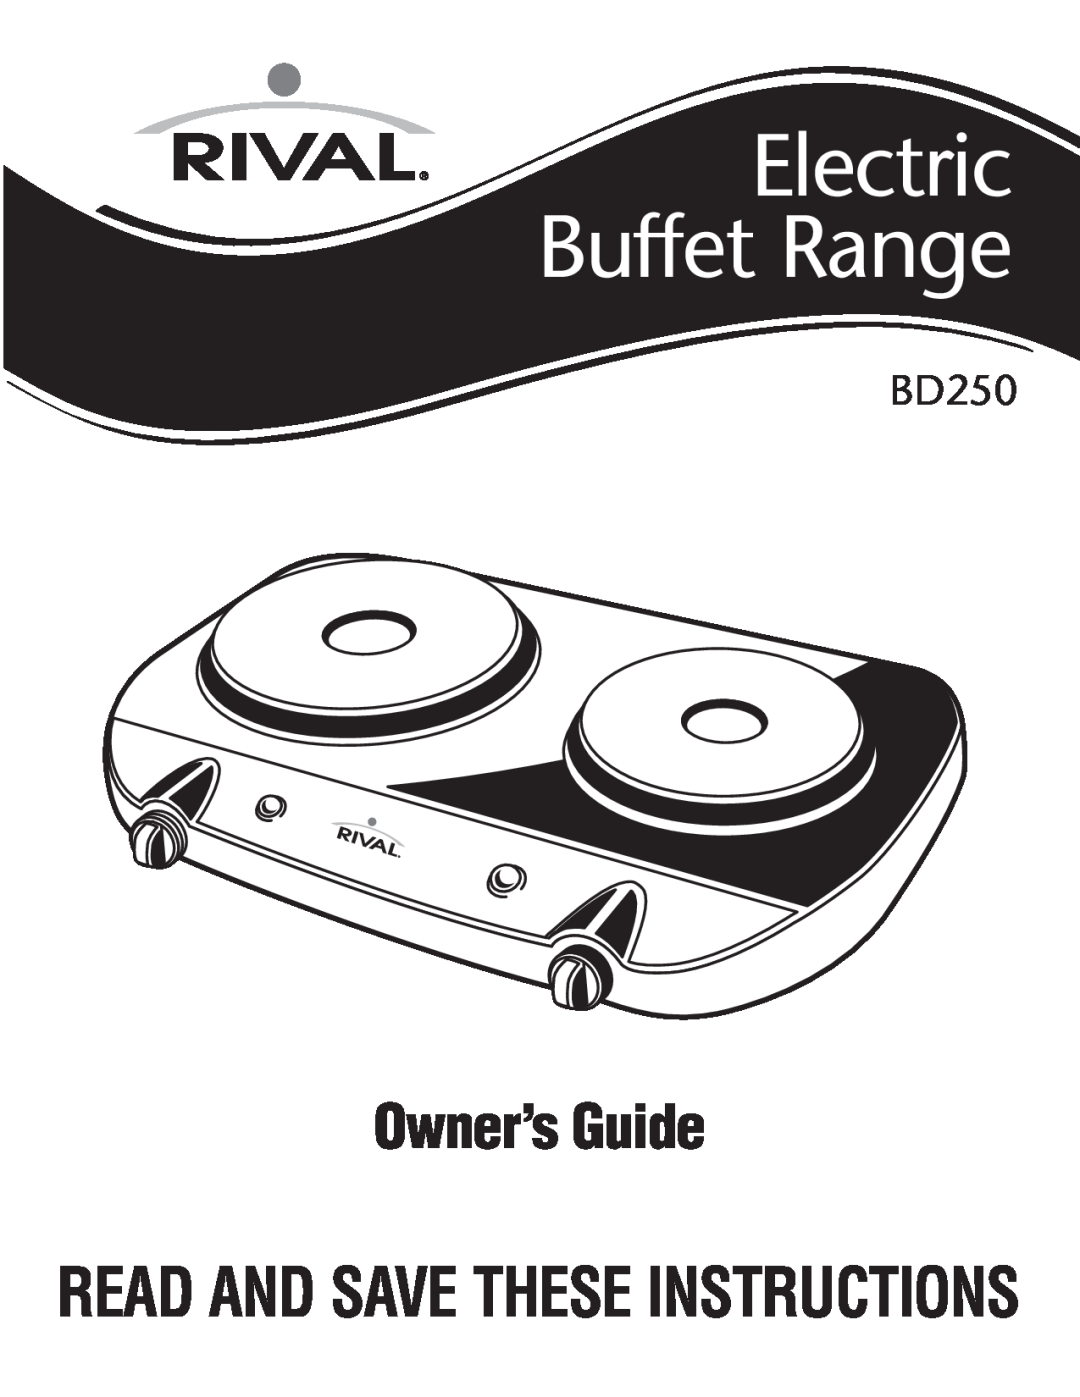 Rival BD250 manual Electric Buffet Range, Owner’sGuide, Read And Save These Instructions 